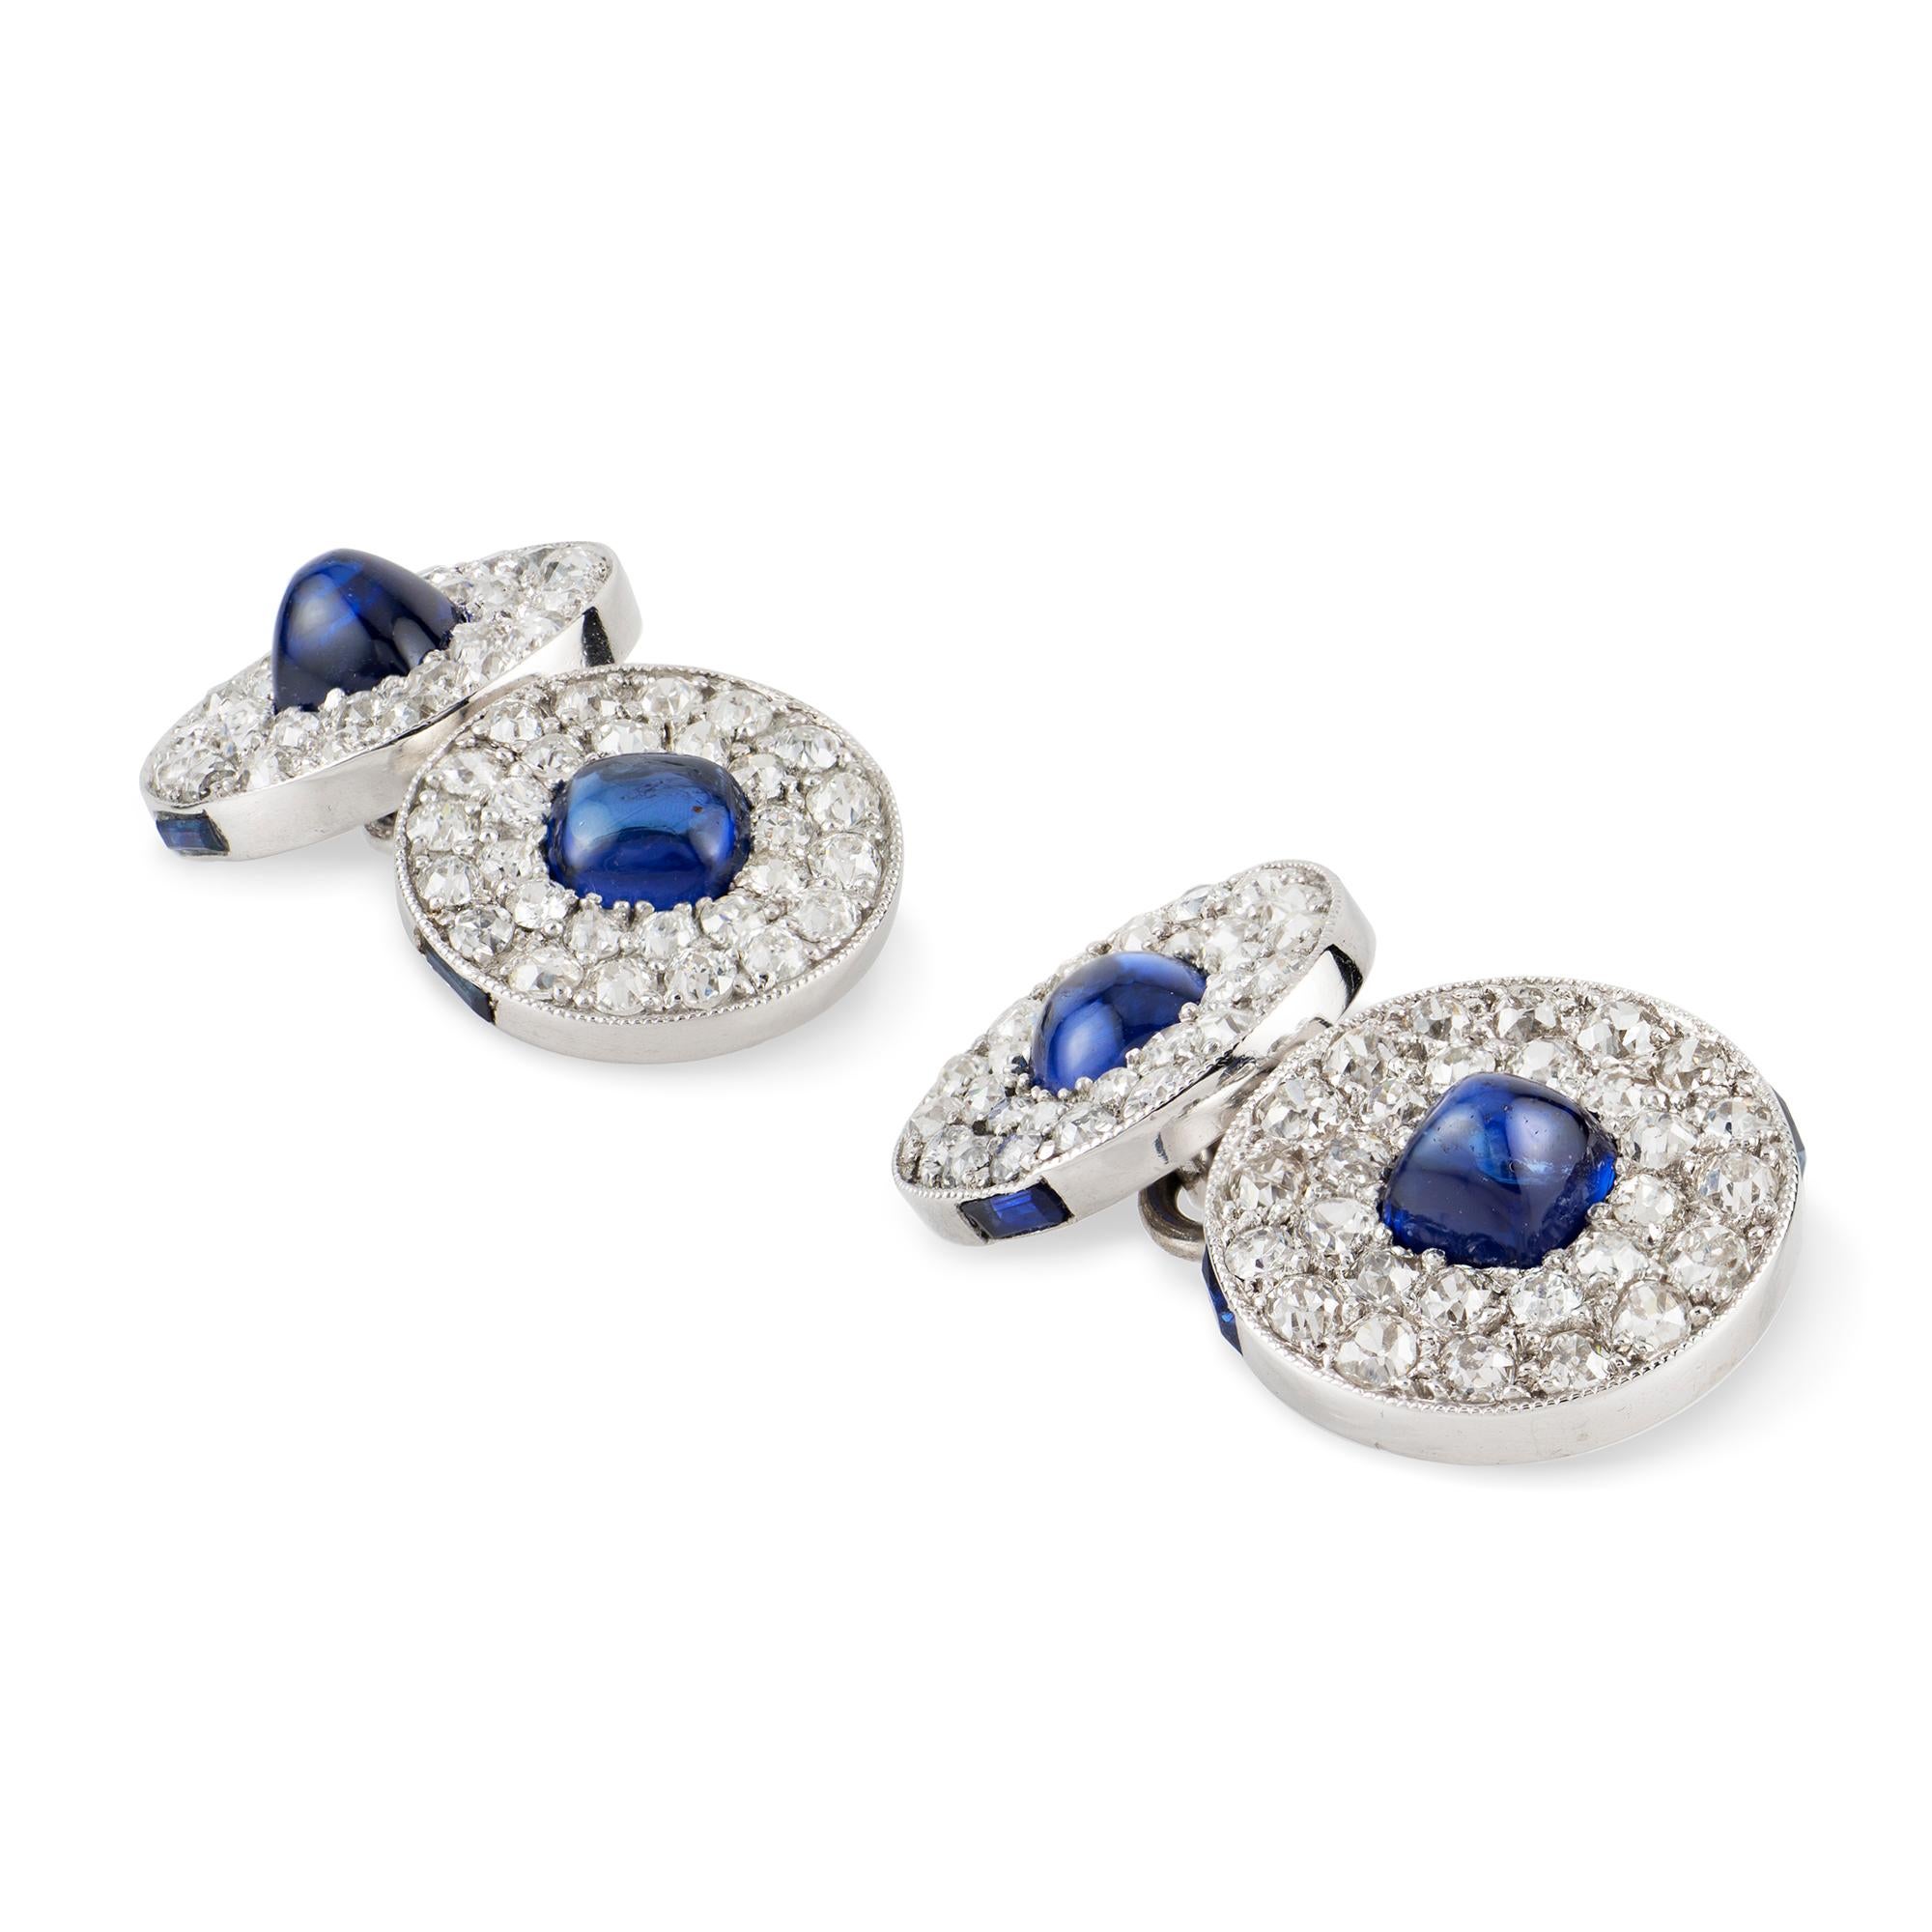 A pair of early 20th century Cartier sapphire and diamond cufflinks, each with a round link centrally set with a sugarloaf-cut sapphire, surrounded by twenty-eight old-cut diamonds, with two rectangular-cut sapphires set on the side, the diamonds